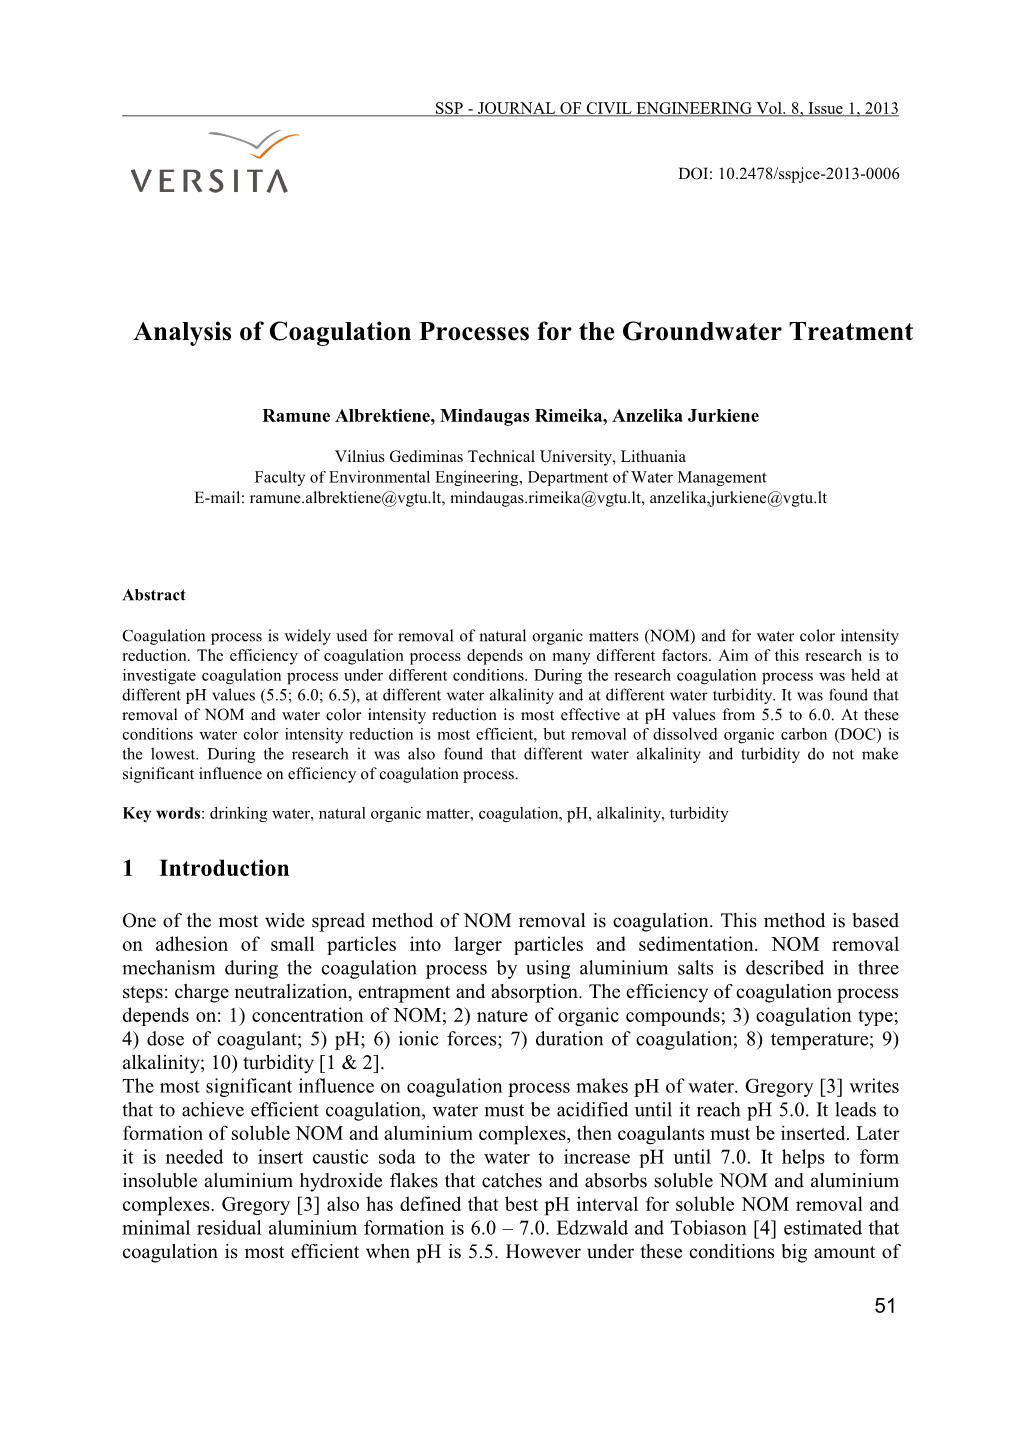 Analysis of Coagulation Processes for the Groundwater Treatment